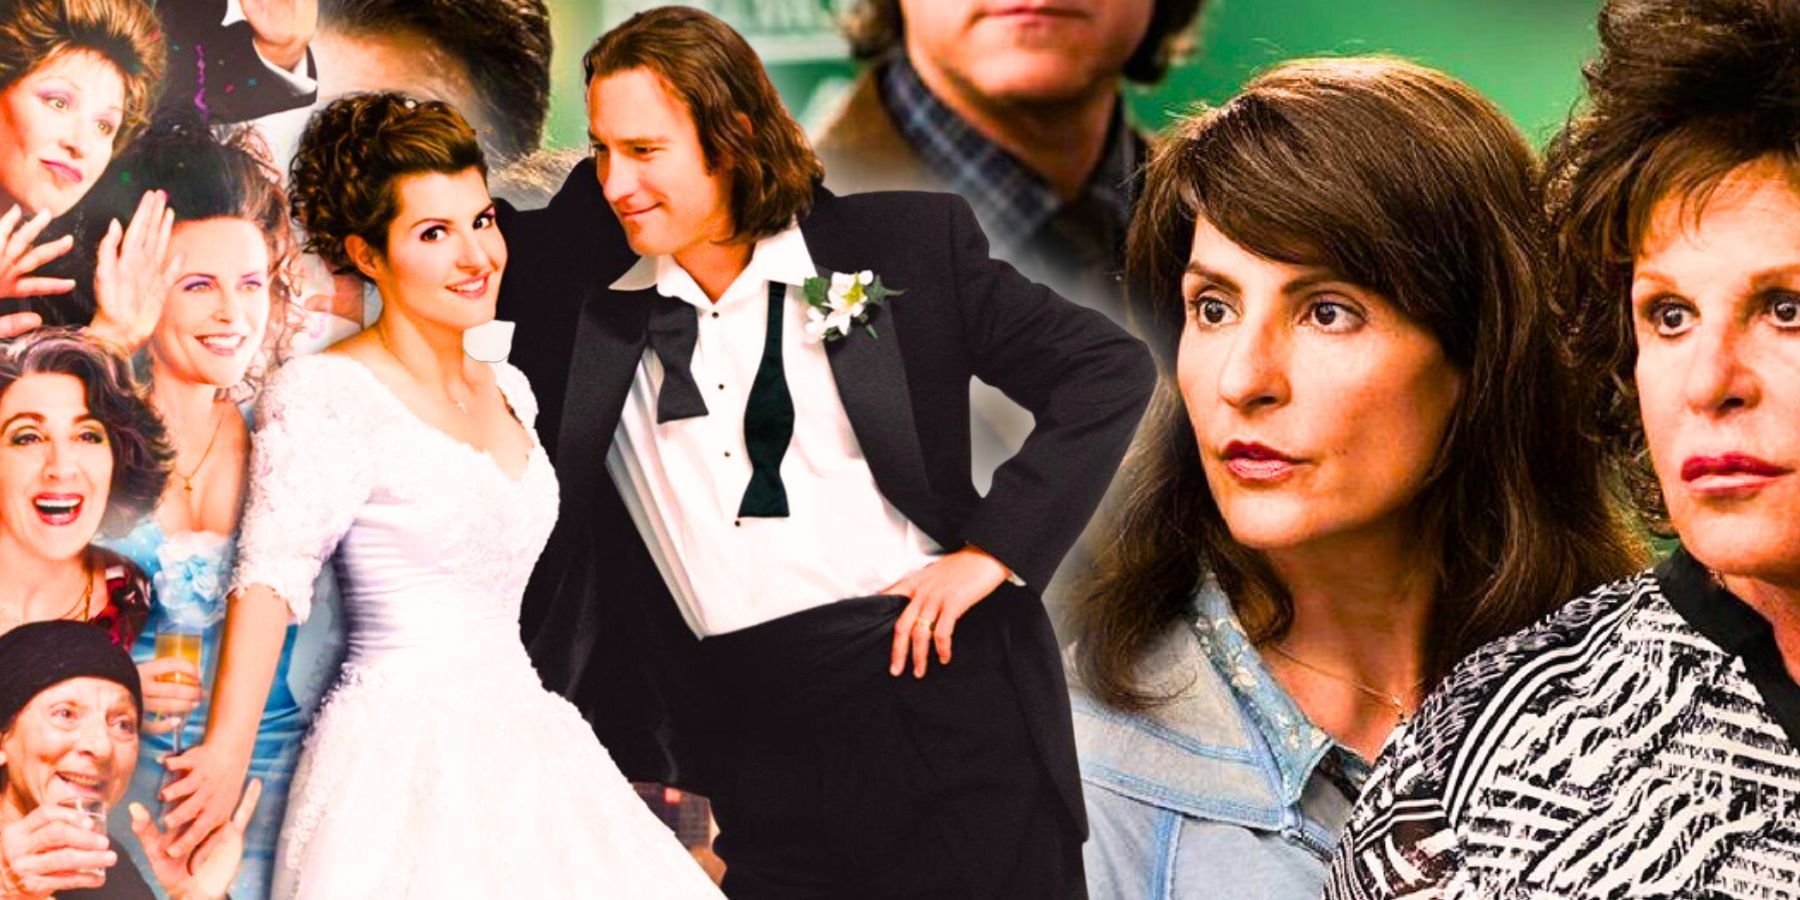 My Big Fat Greek Wedding 1 and 2 movie poster and still collage